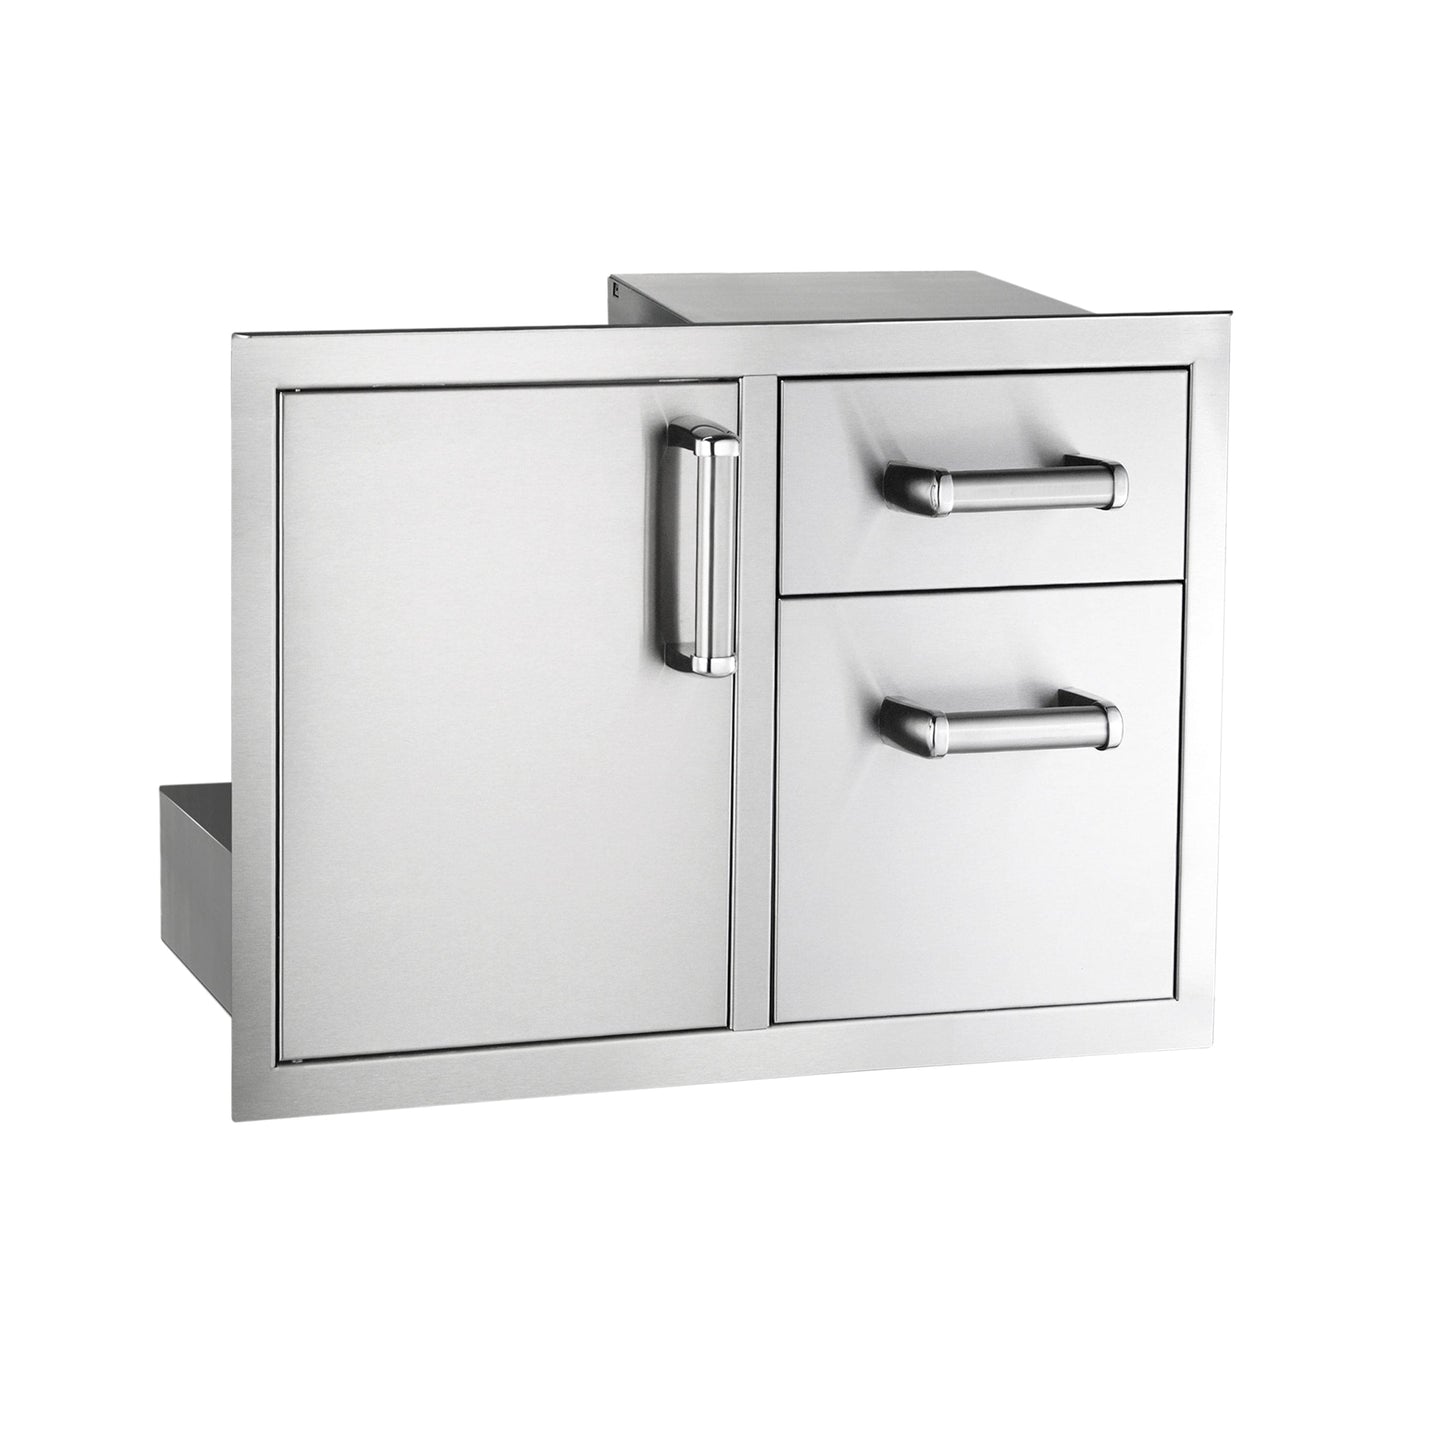 Fire Magic Access Door With Double Drawer